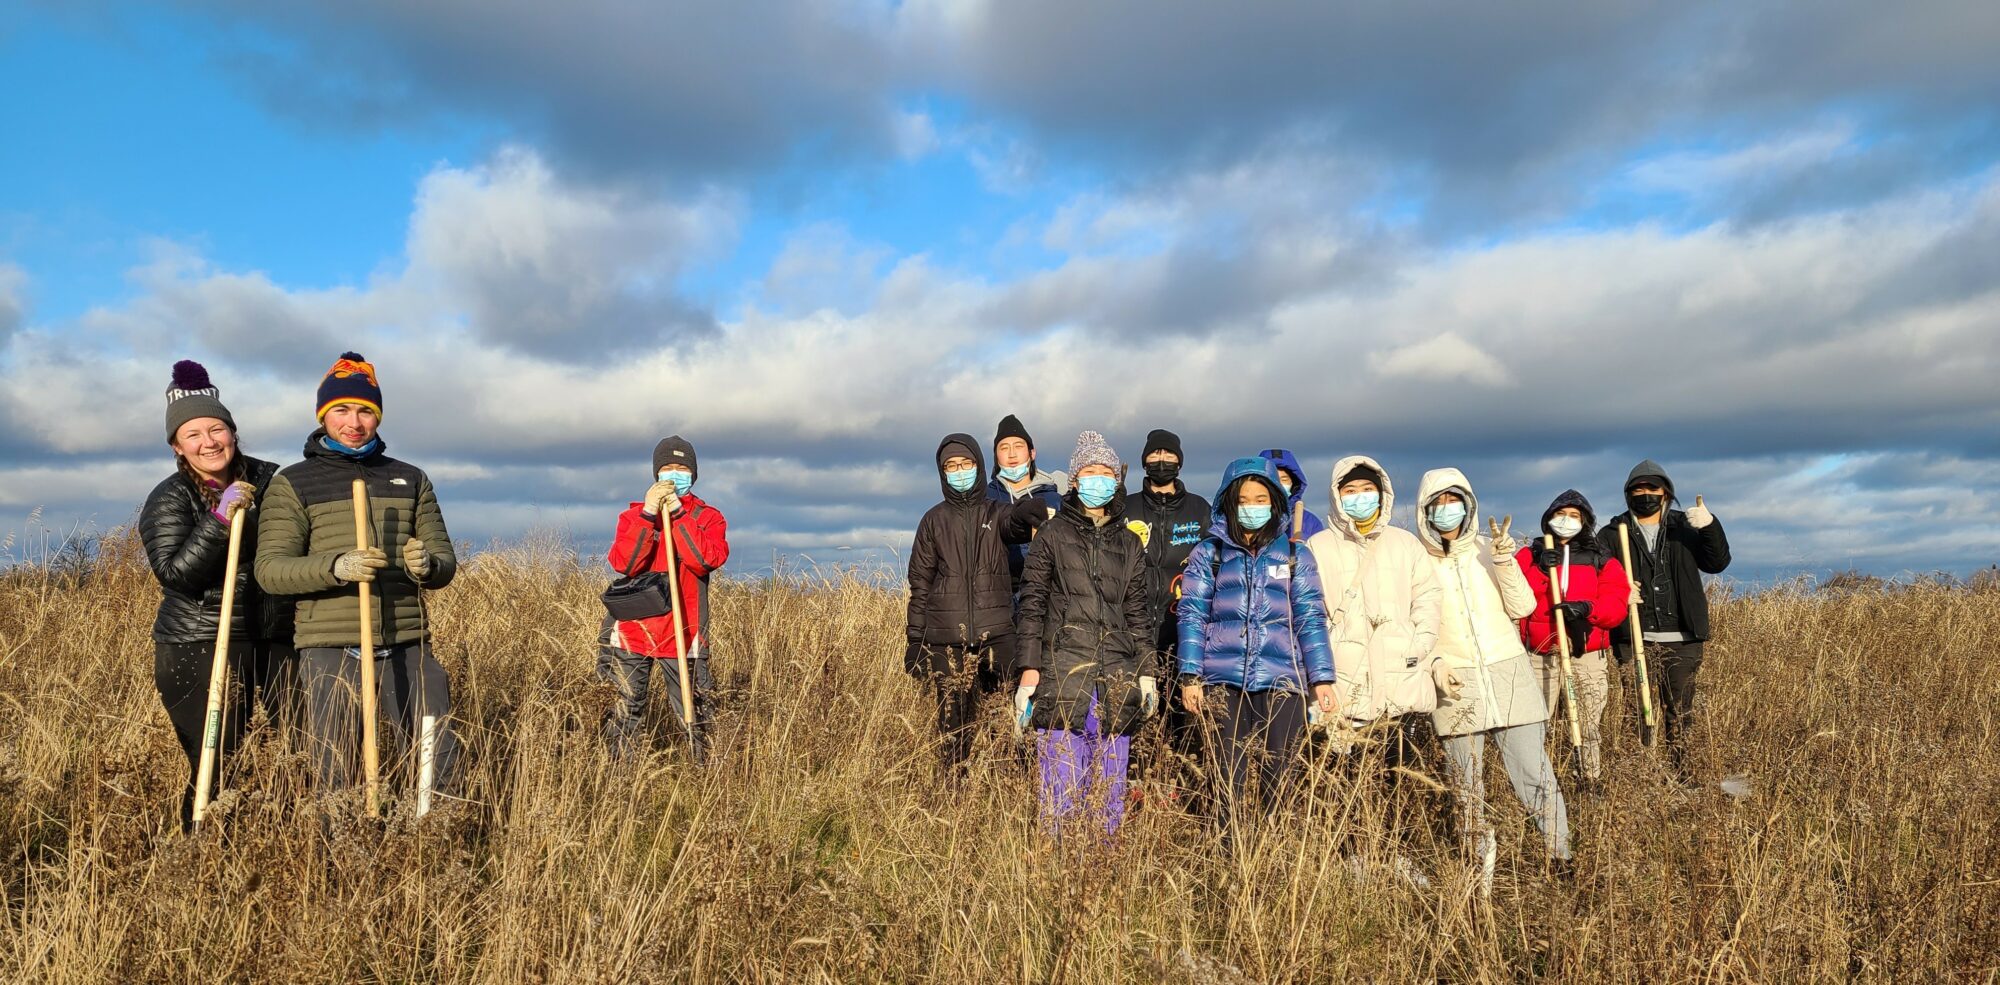 a group of people in winter jackets stand together in a field